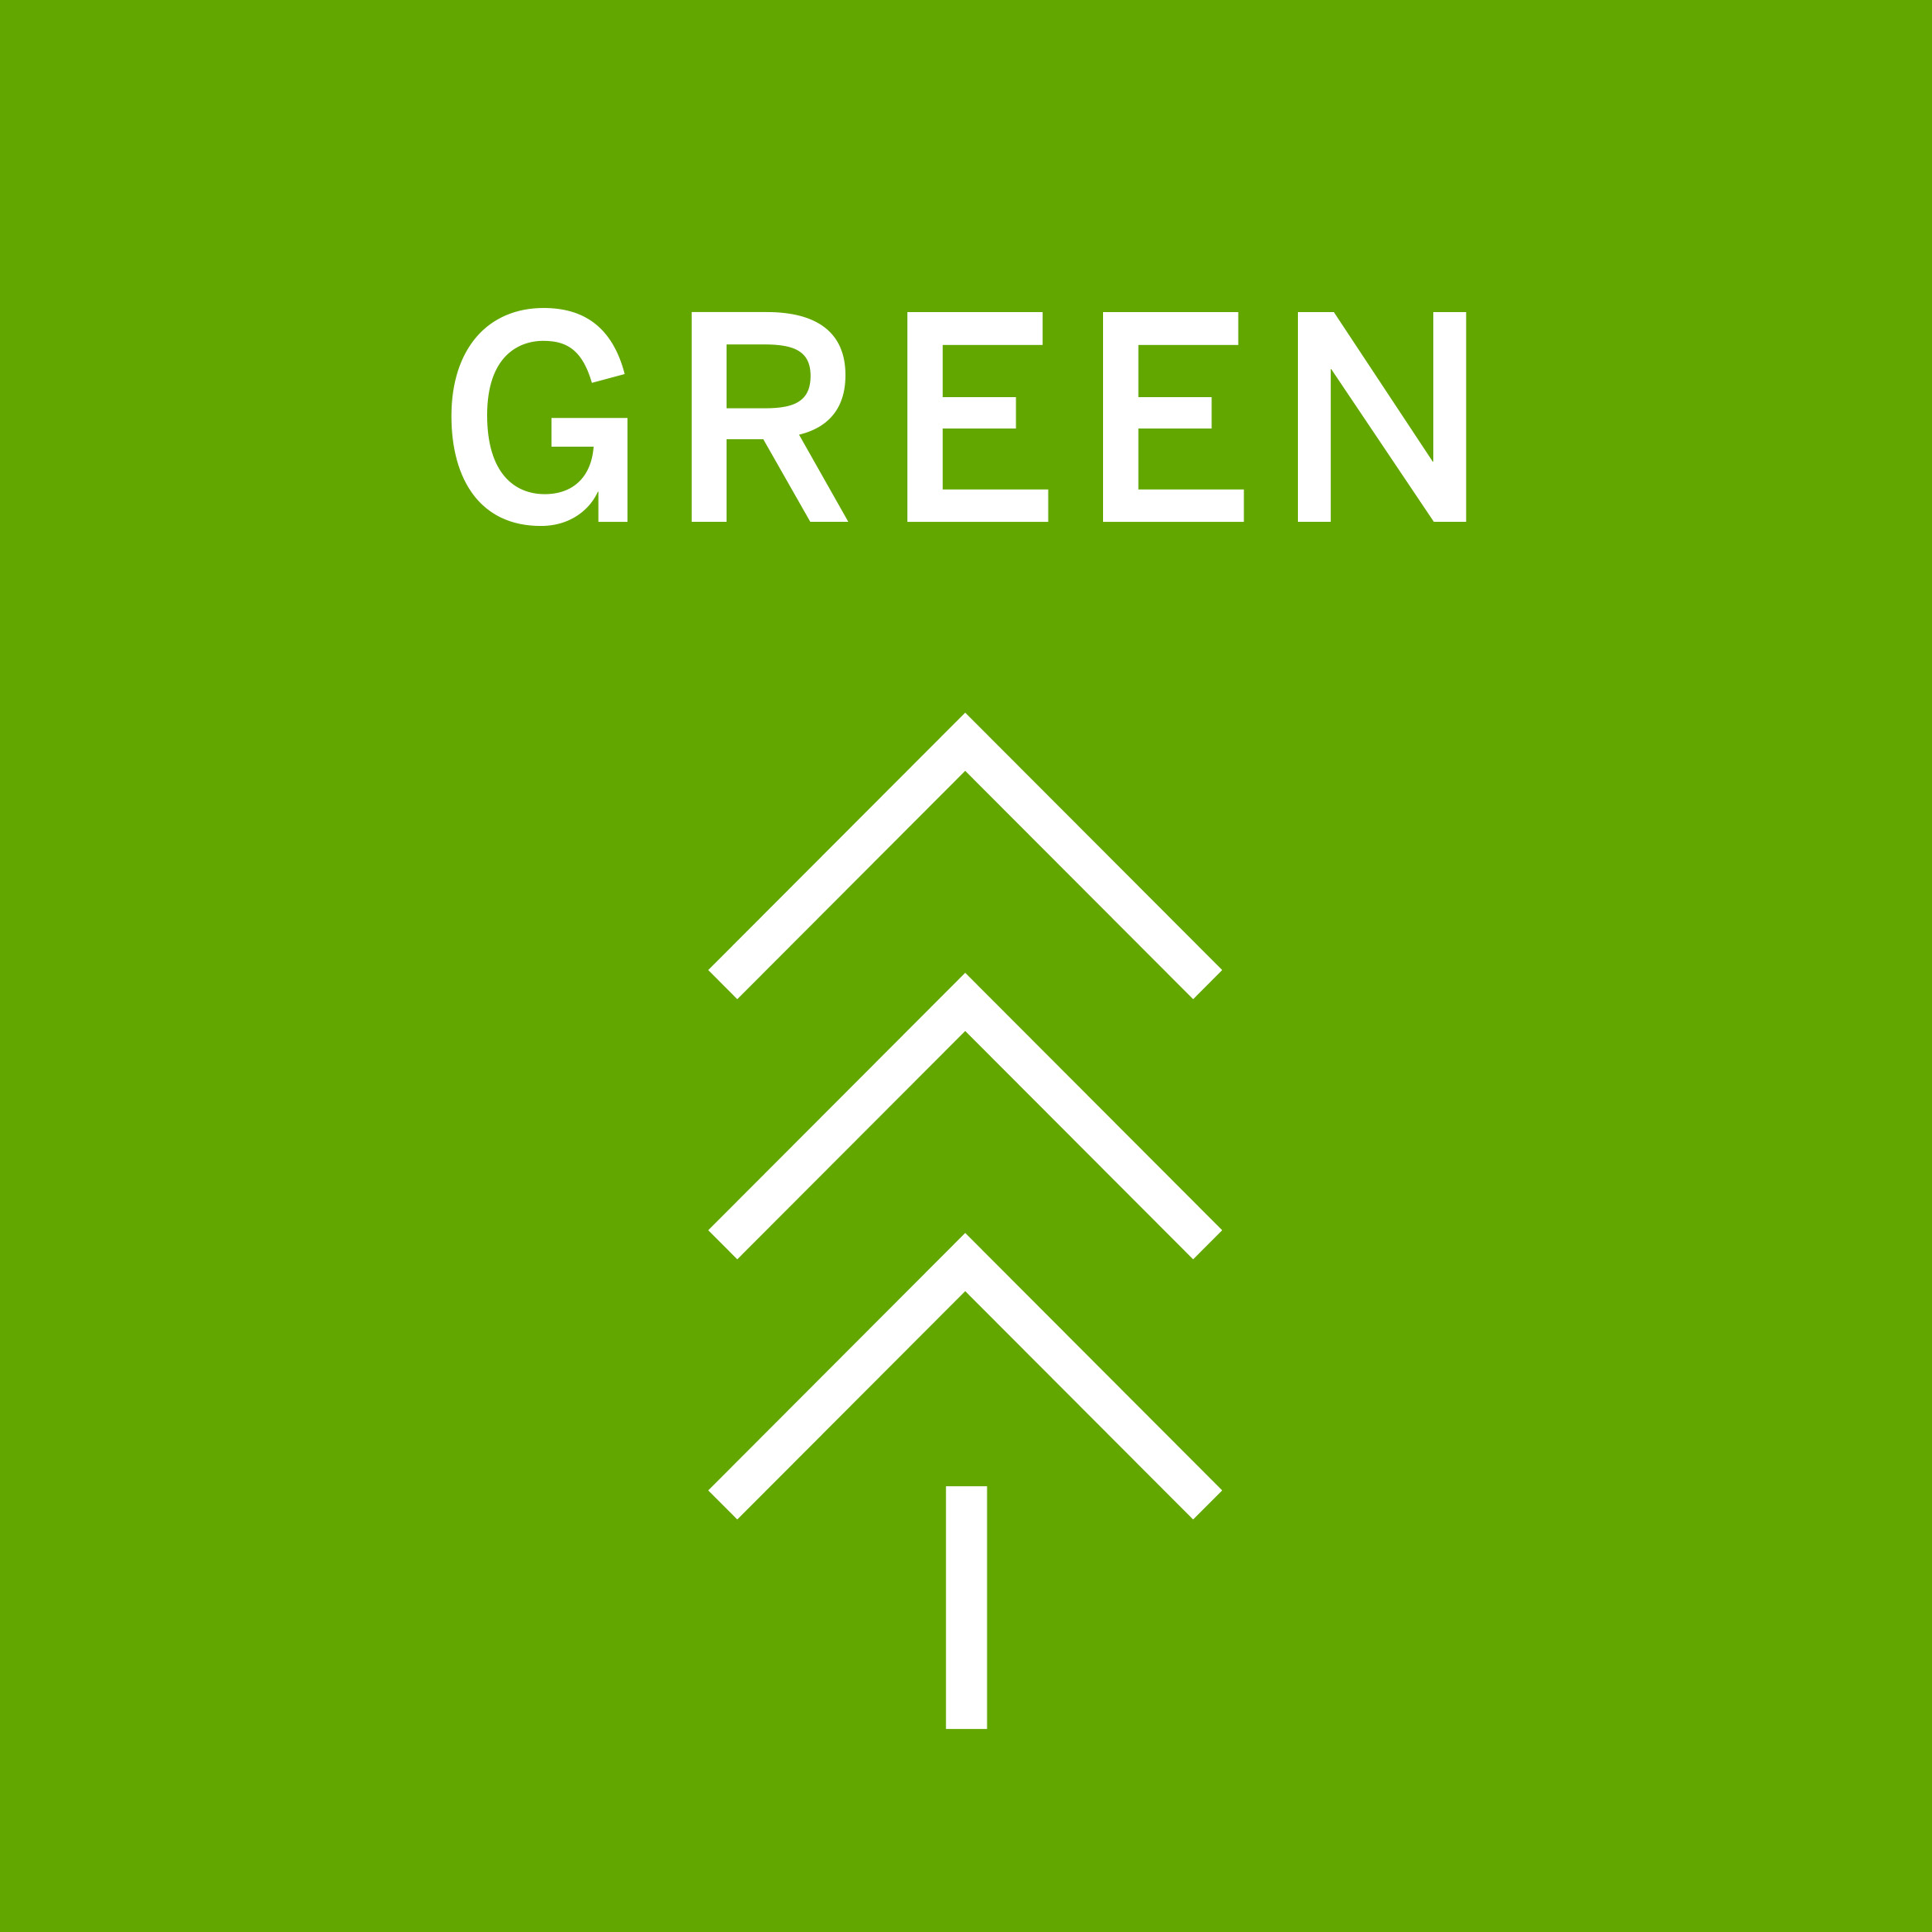 article_universal_cleanandgreen_icon_green.jpg